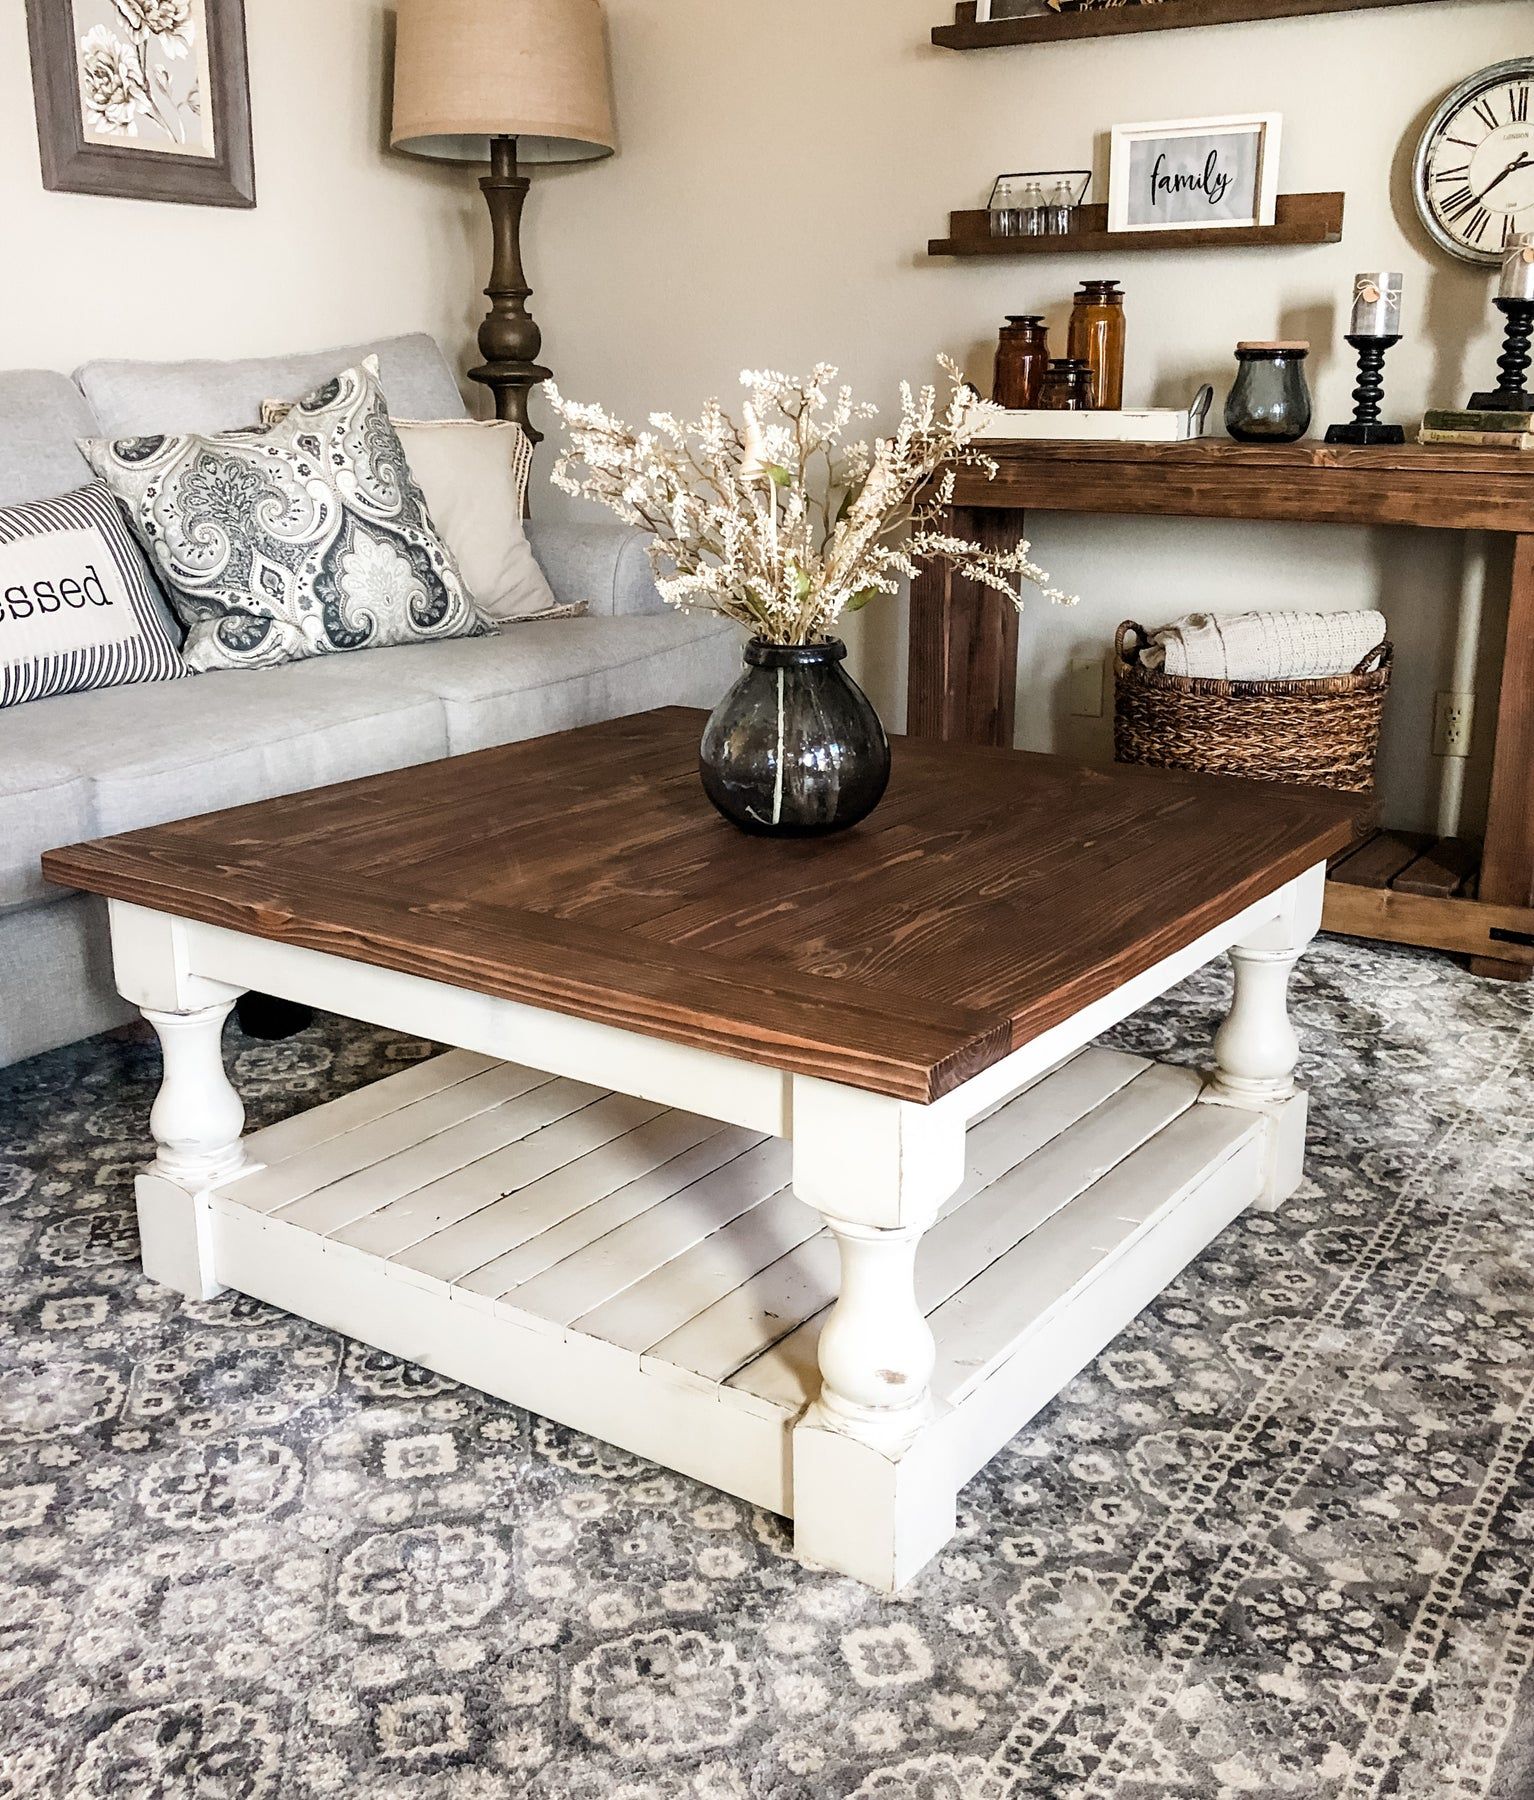 Rustic Baluster Farmhouse Coffee Table (prov Square) – The Love Made Home Inside Rustic Coffee Tables (View 4 of 20)